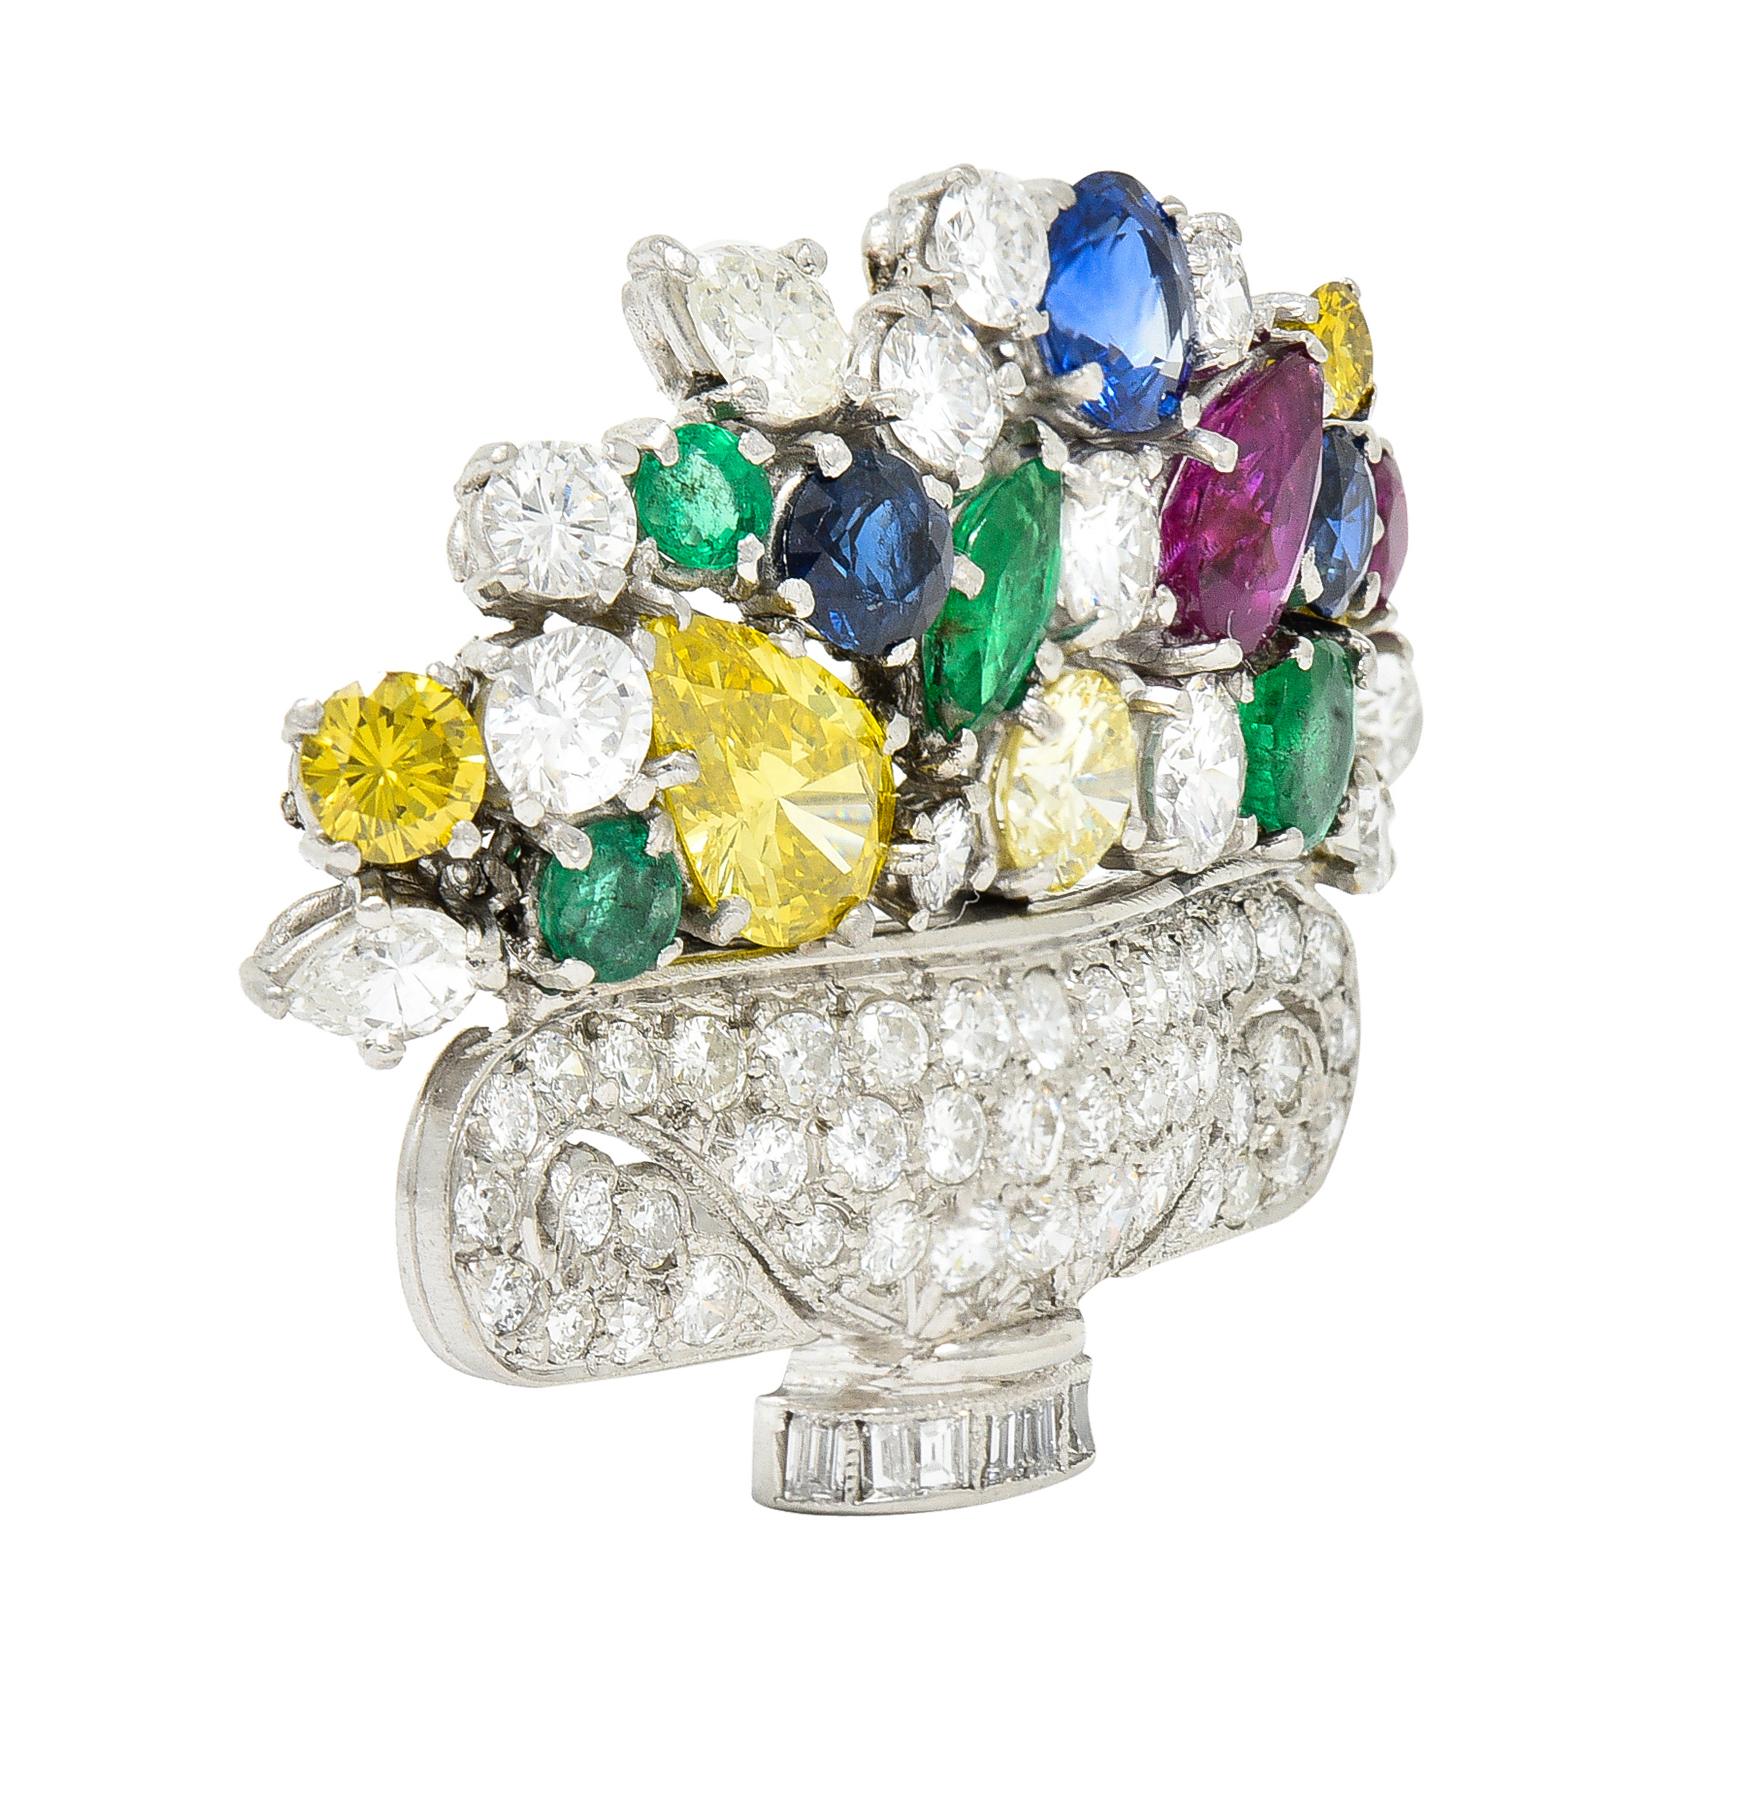 Designed as a vase with an overflowing flower arrangement of diamonds, rubies, emeralds and sapphires. Featuring round brilliant, pear, marquise and baguette cuts - prong, bead and bezel set throughout. Diamonds weigh approximately 5.60 carats total